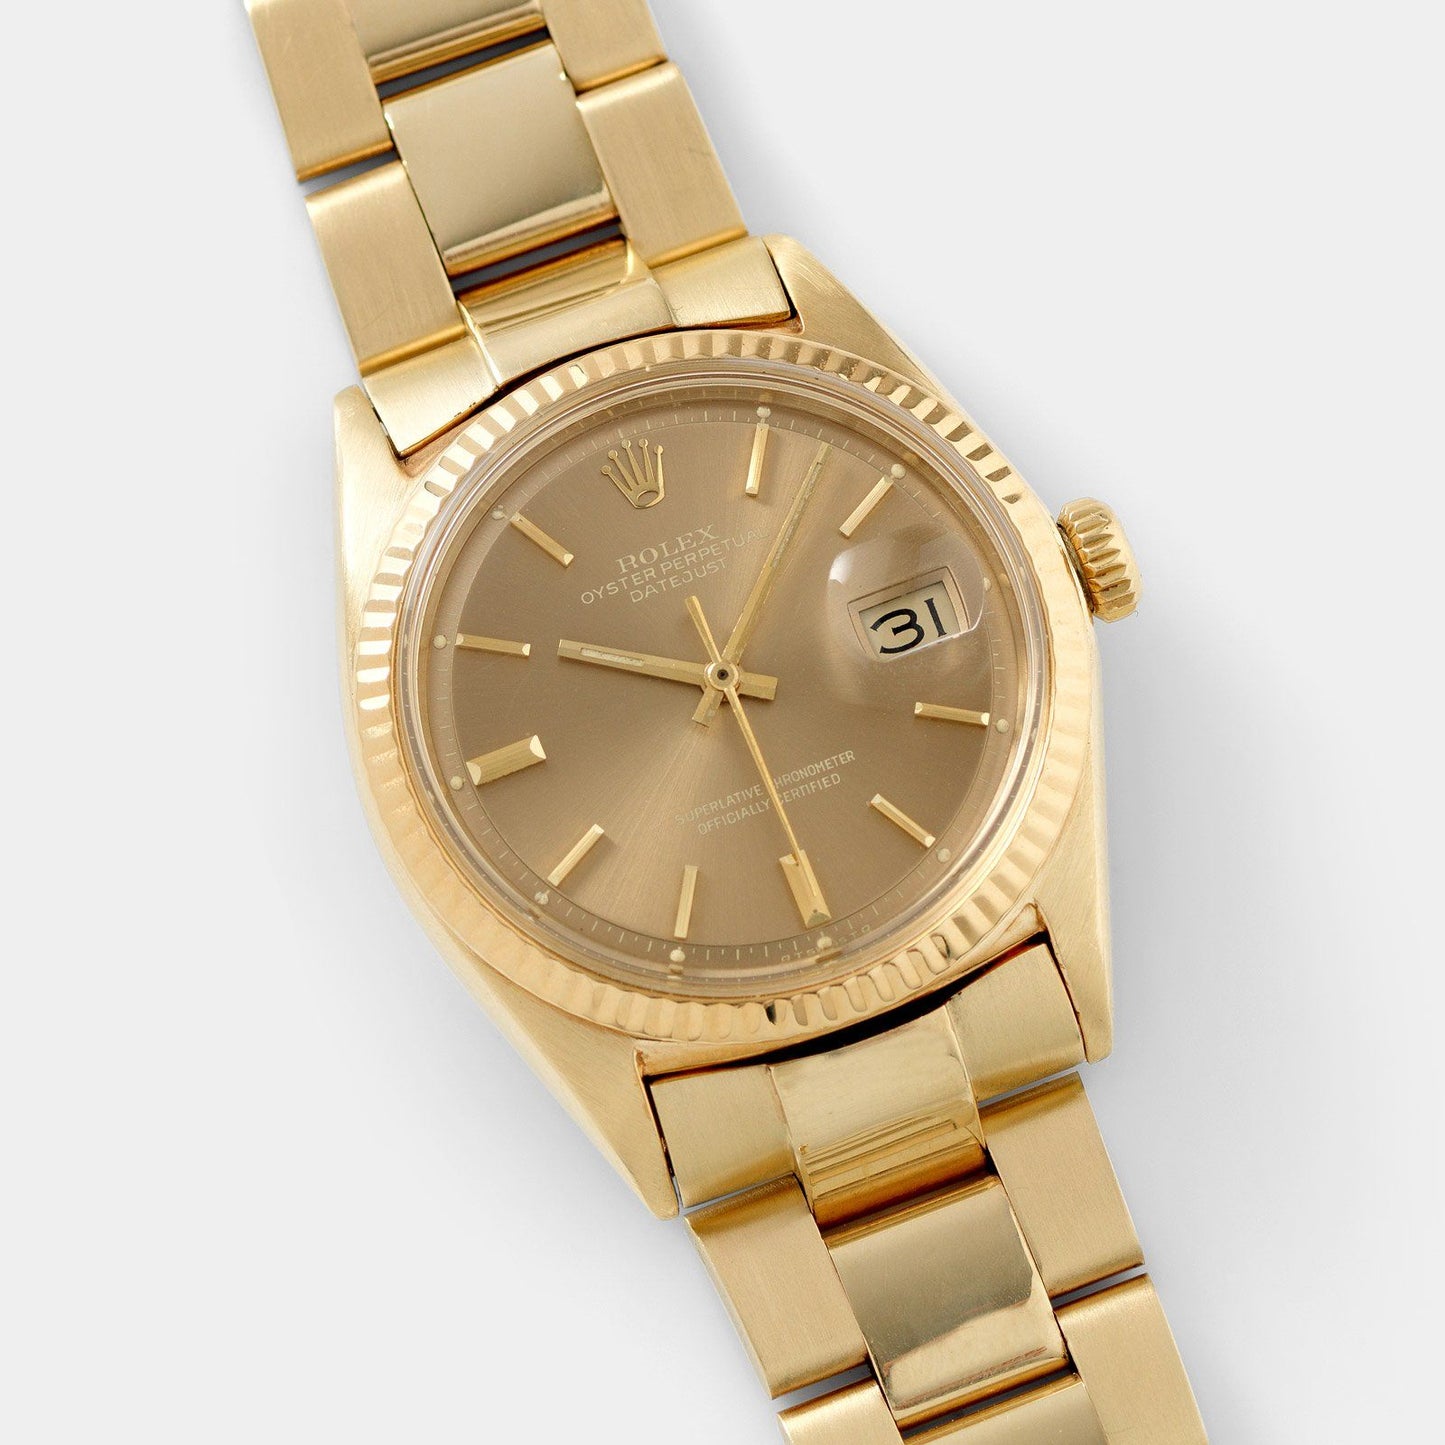 Rolex Datejust 14kt Yellow Gold 1601 Tobacco Dial 